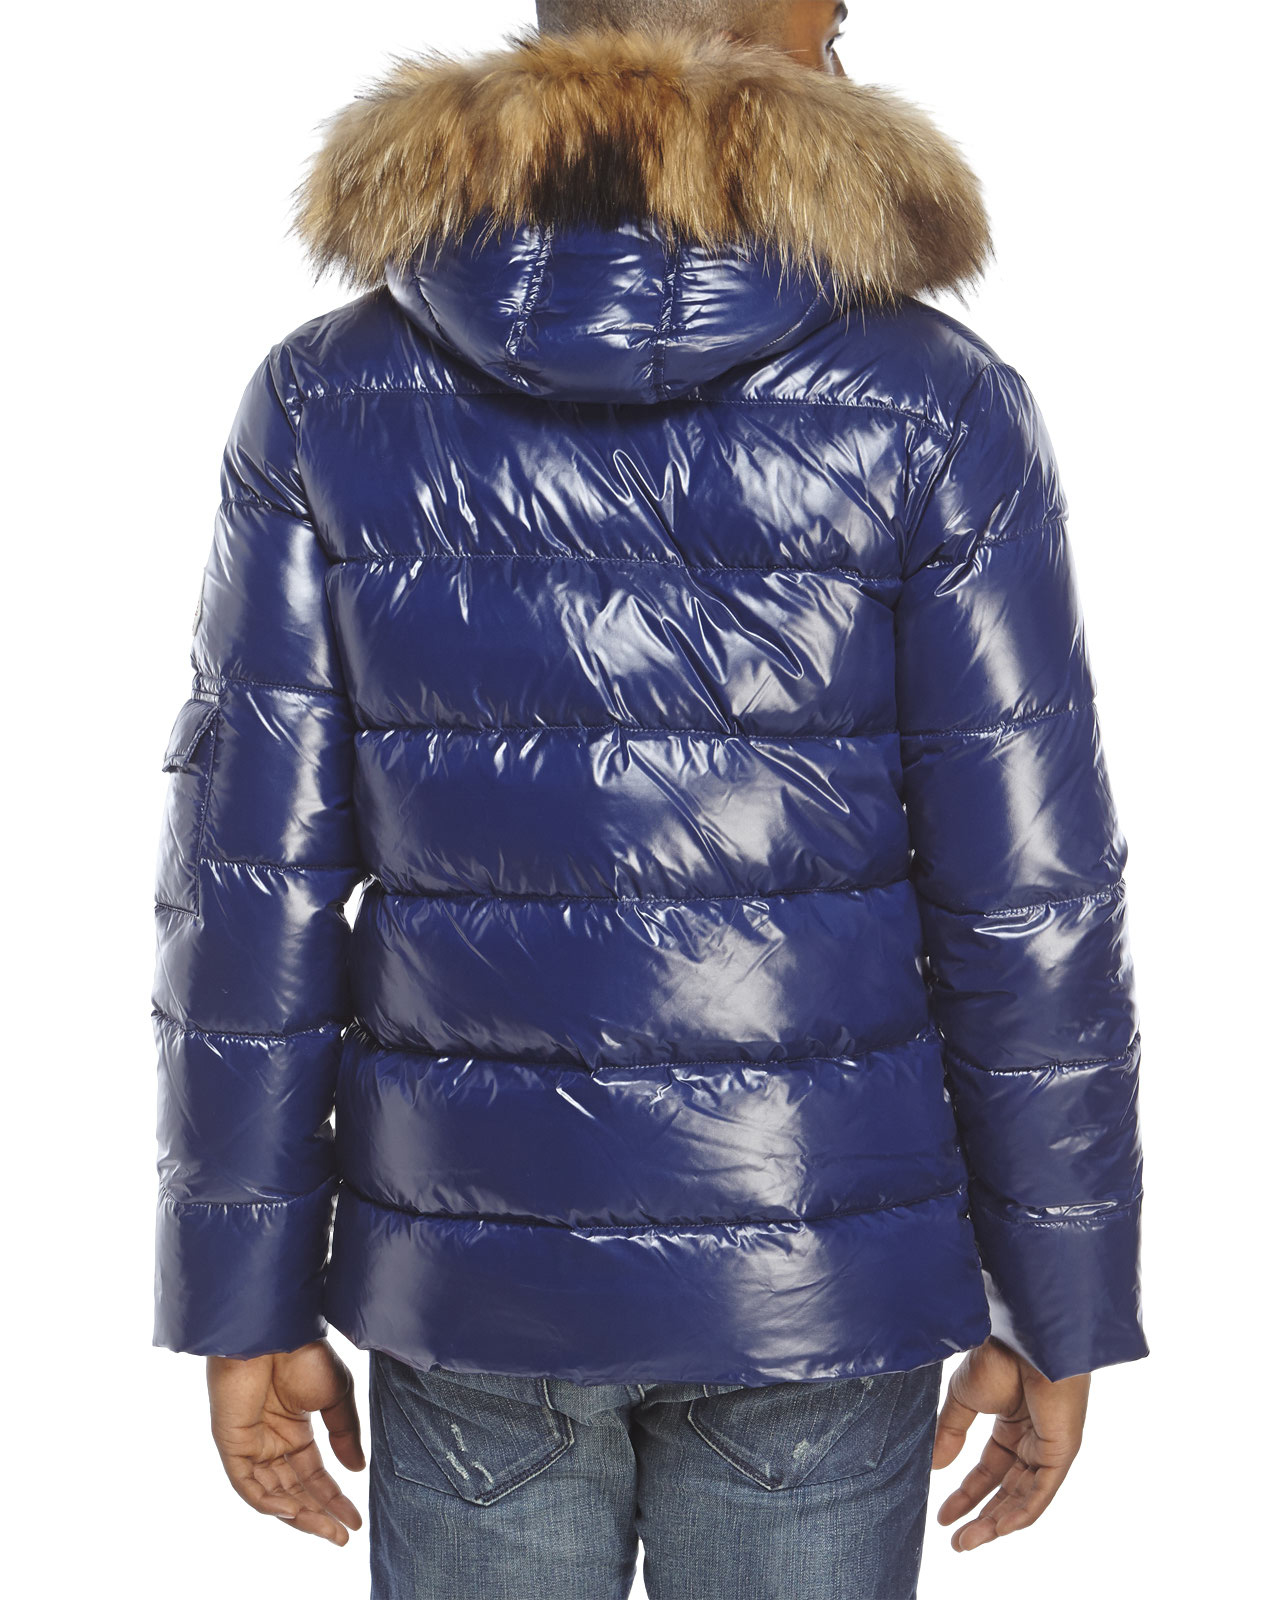 Lyst - Pyrenex Real Fur Authentic Shiny Down Jacket in Blue for Men